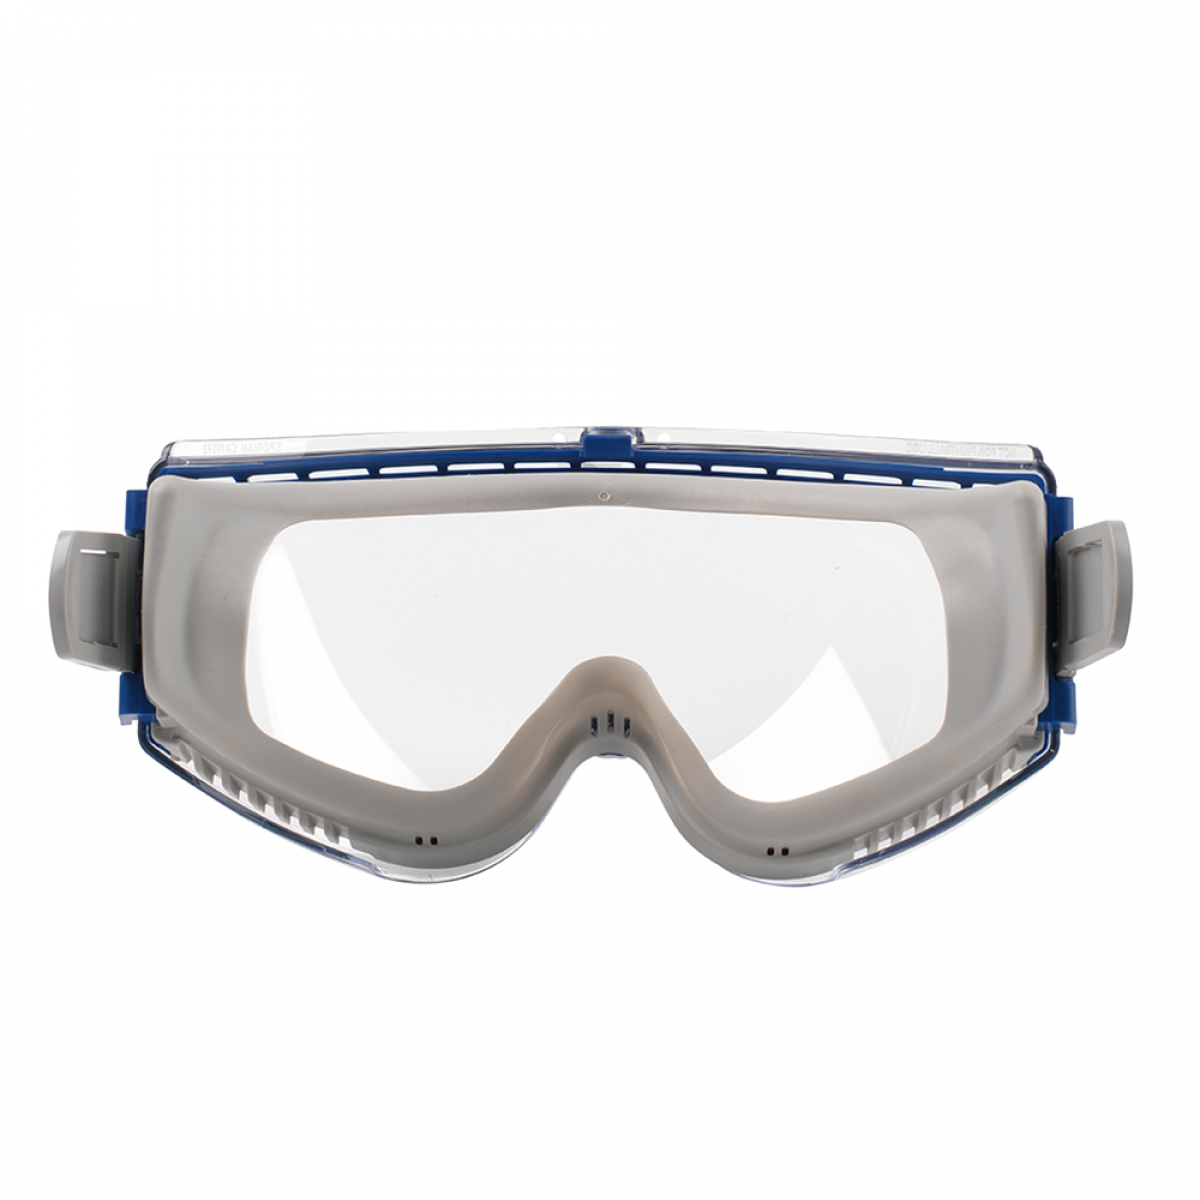 Honeywell Maxx Pro Goggles with Toric Lens - inside view